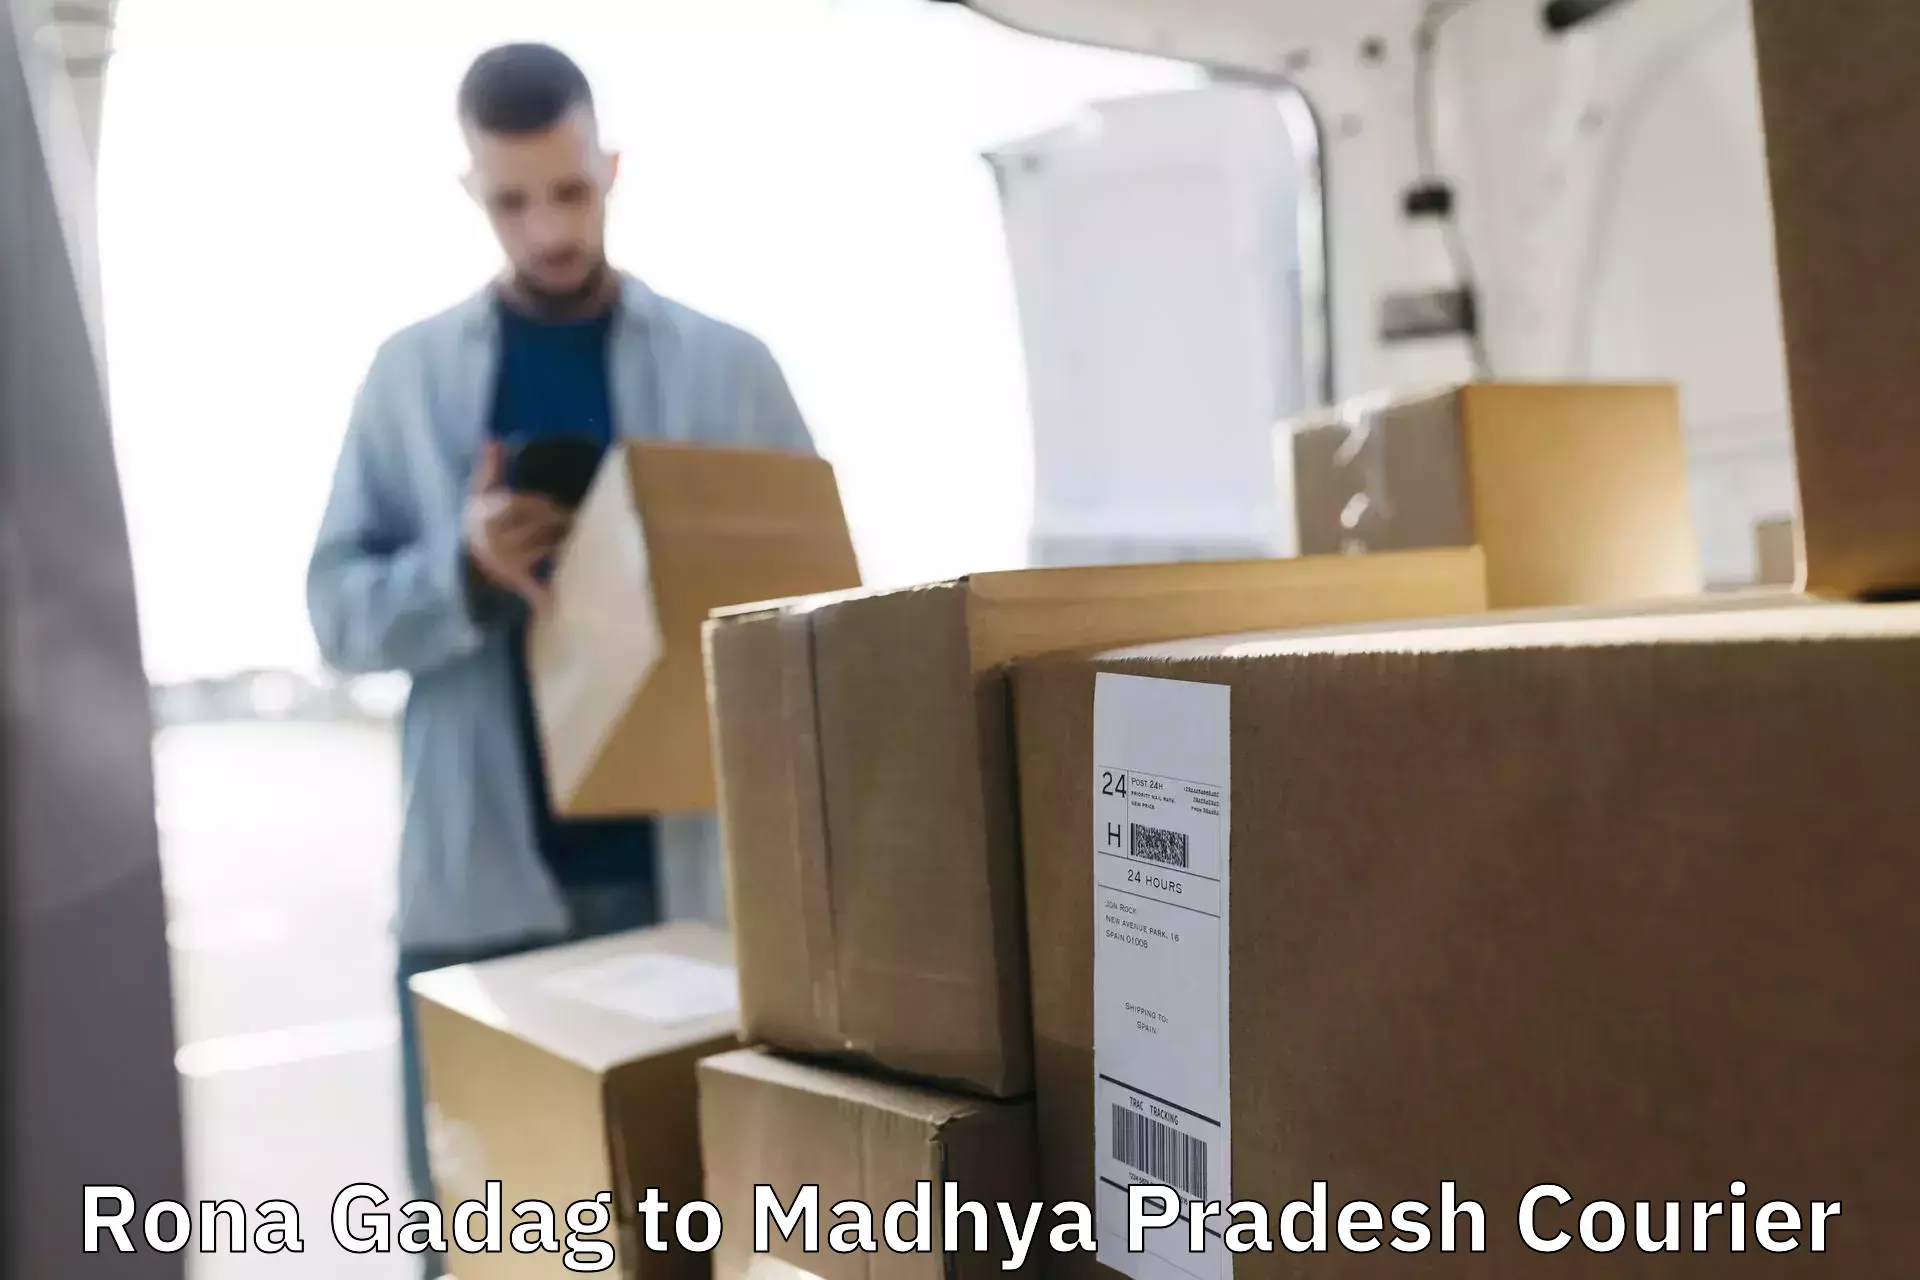 State-of-the-art courier technology Rona Gadag to Nagda